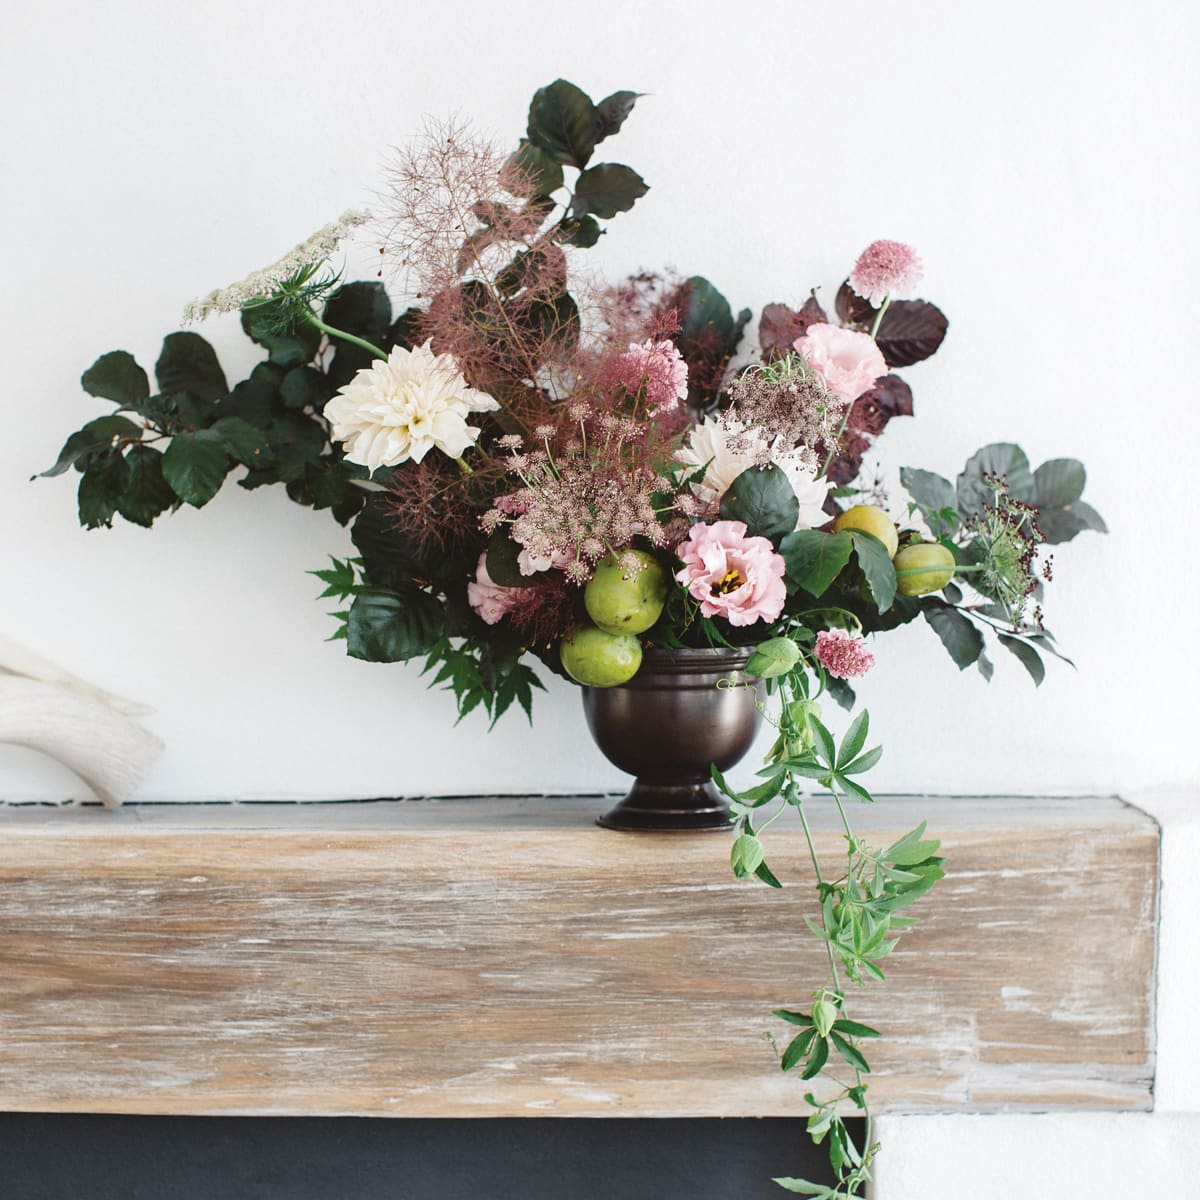 A large moody compote floral arrangement on the modern fireplace mantel announces the farm fresh florist product category.